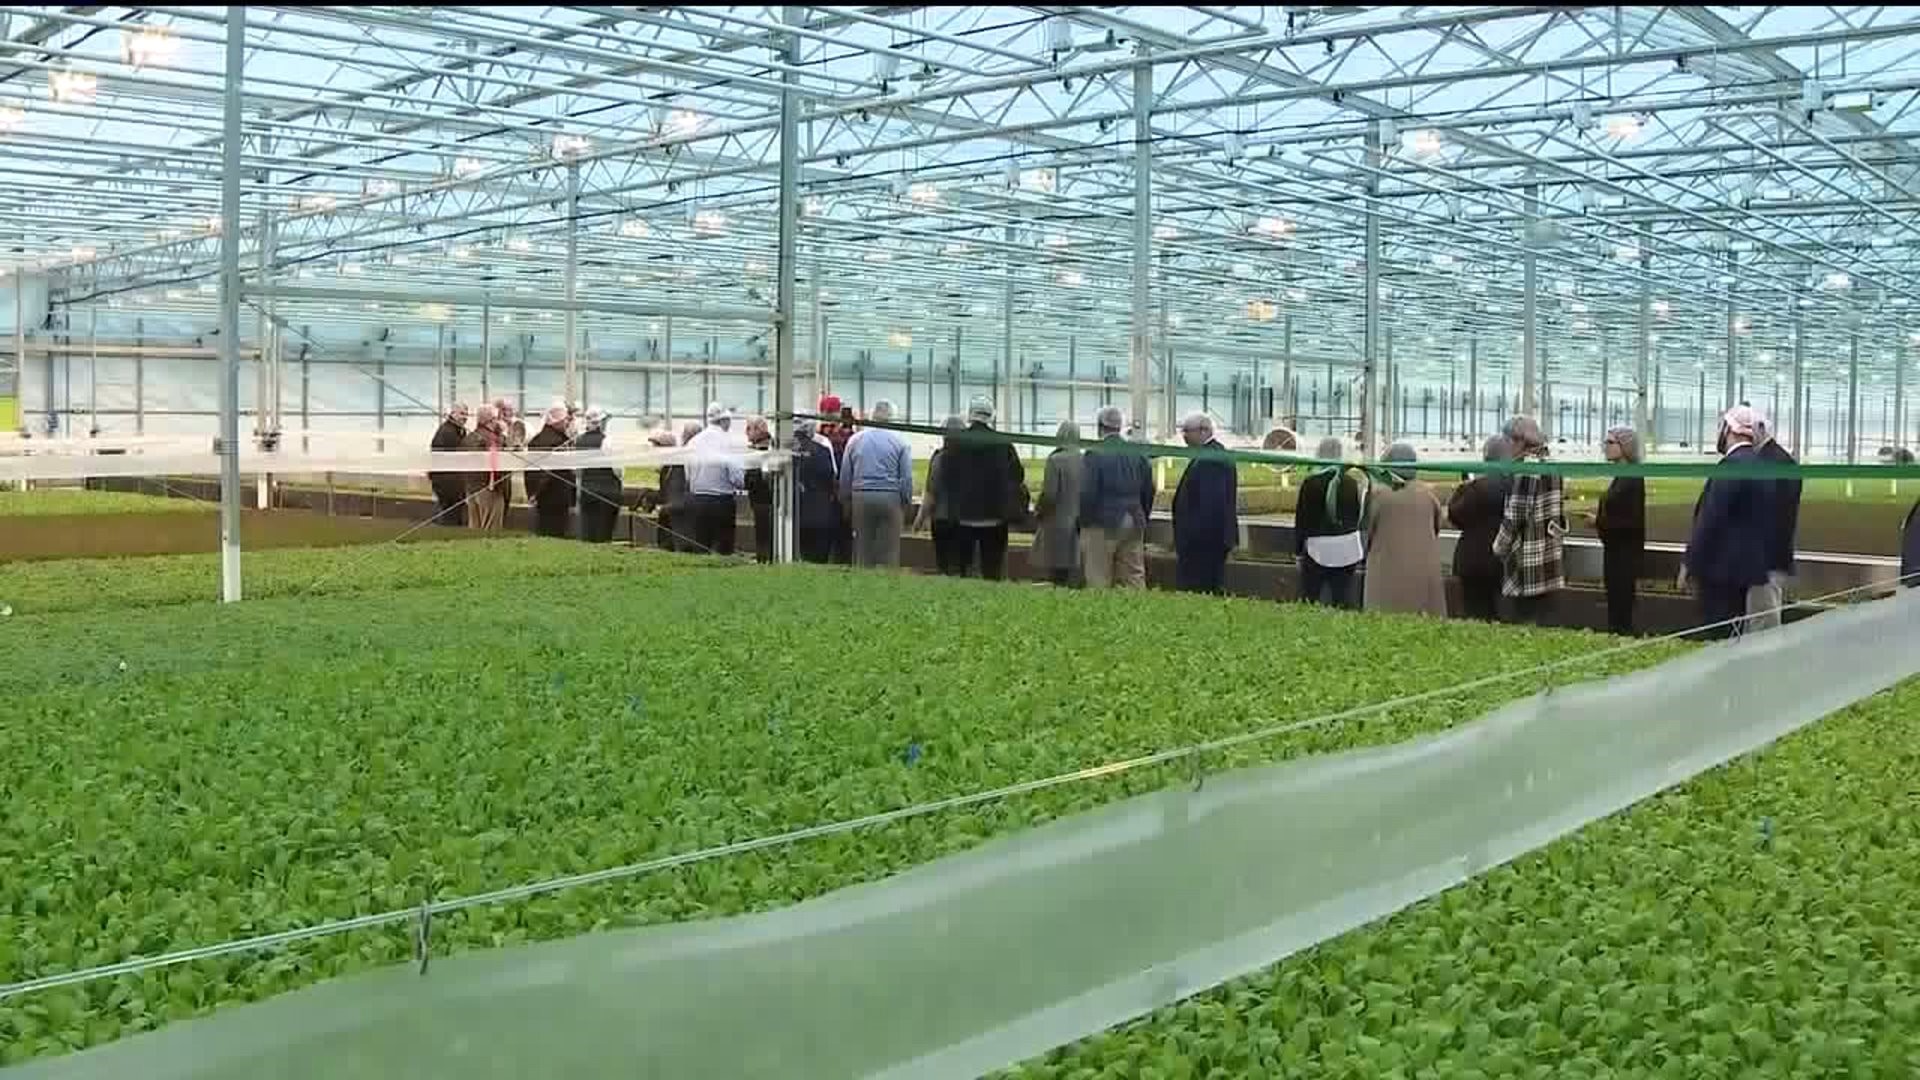 BrightFarms Celebrates First Harvest in Snyder County